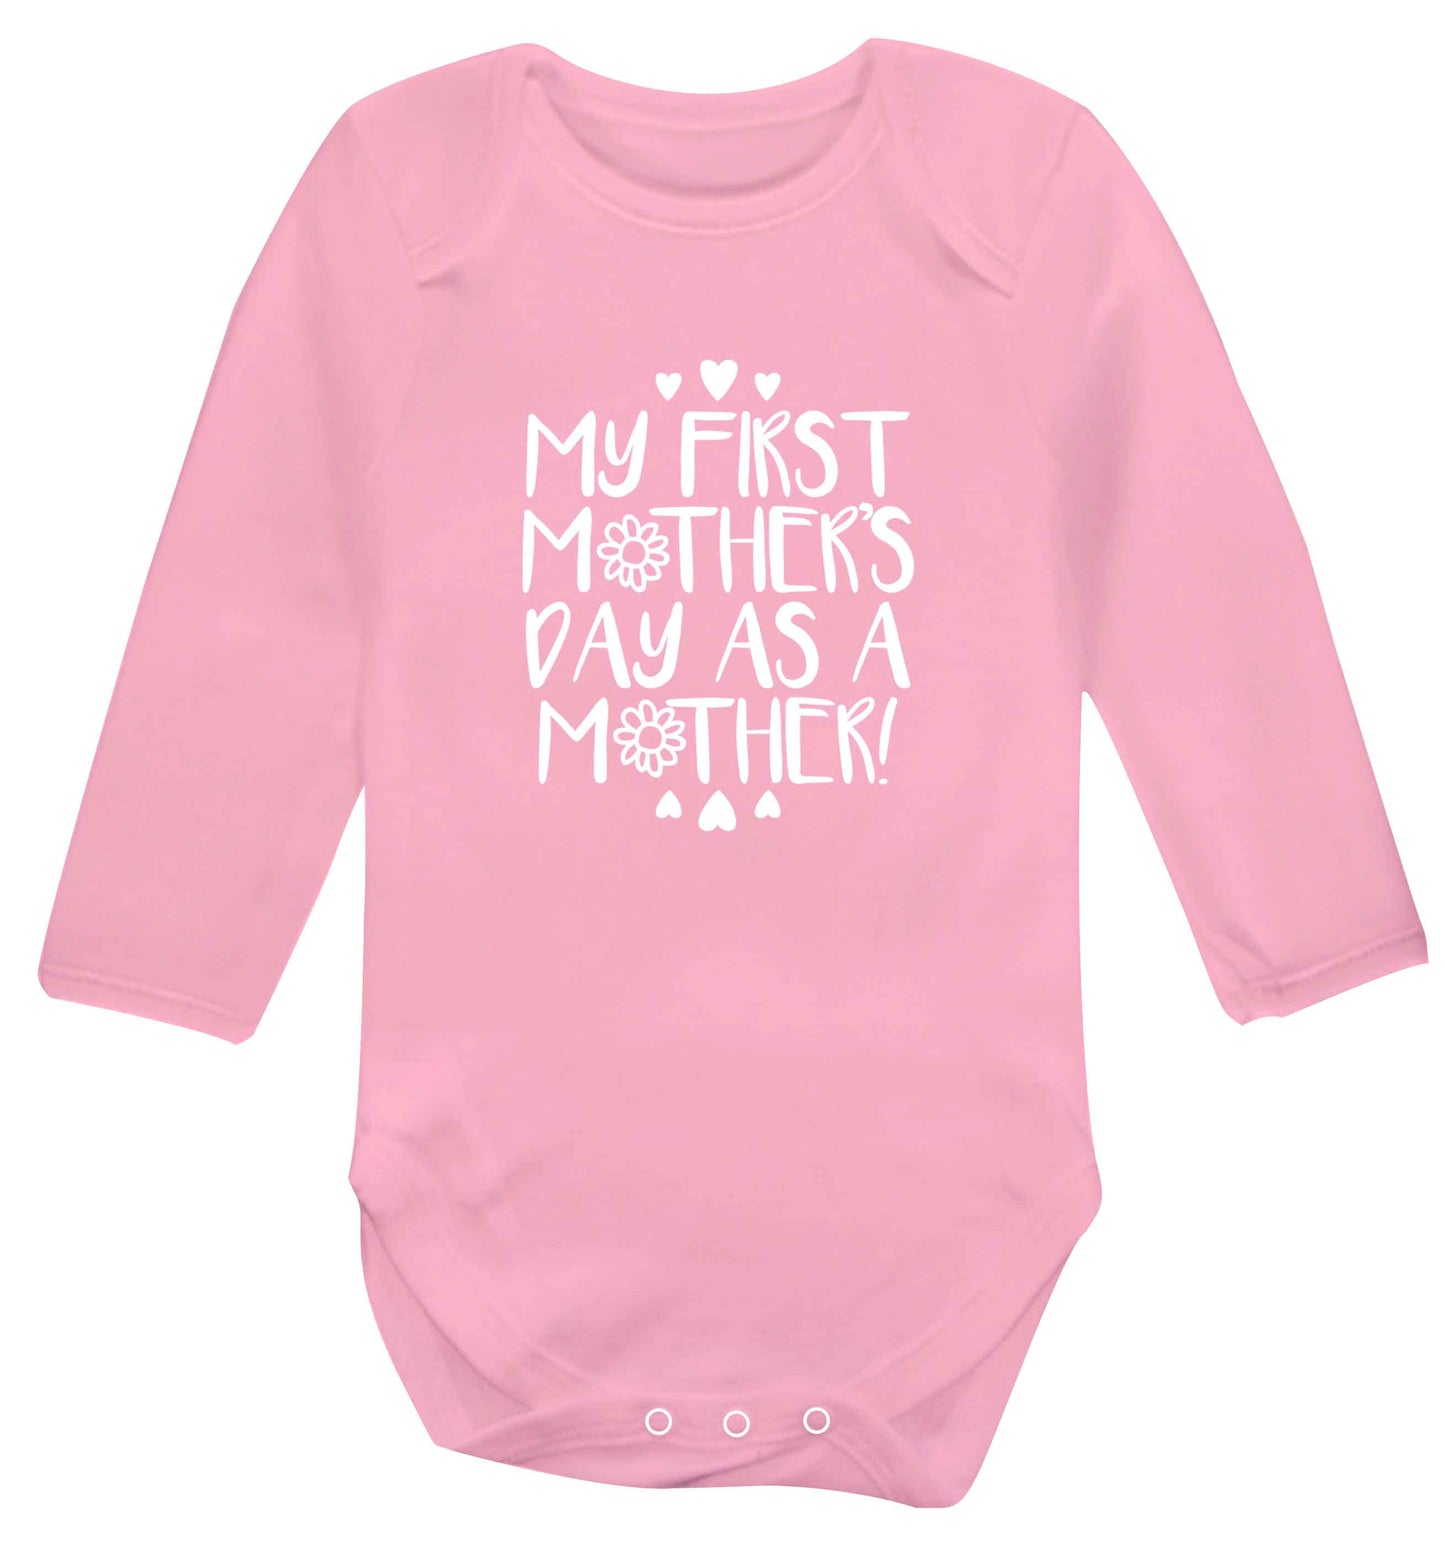 It's my first mother's day as a mother baby vest long sleeved pale pink 6-12 months